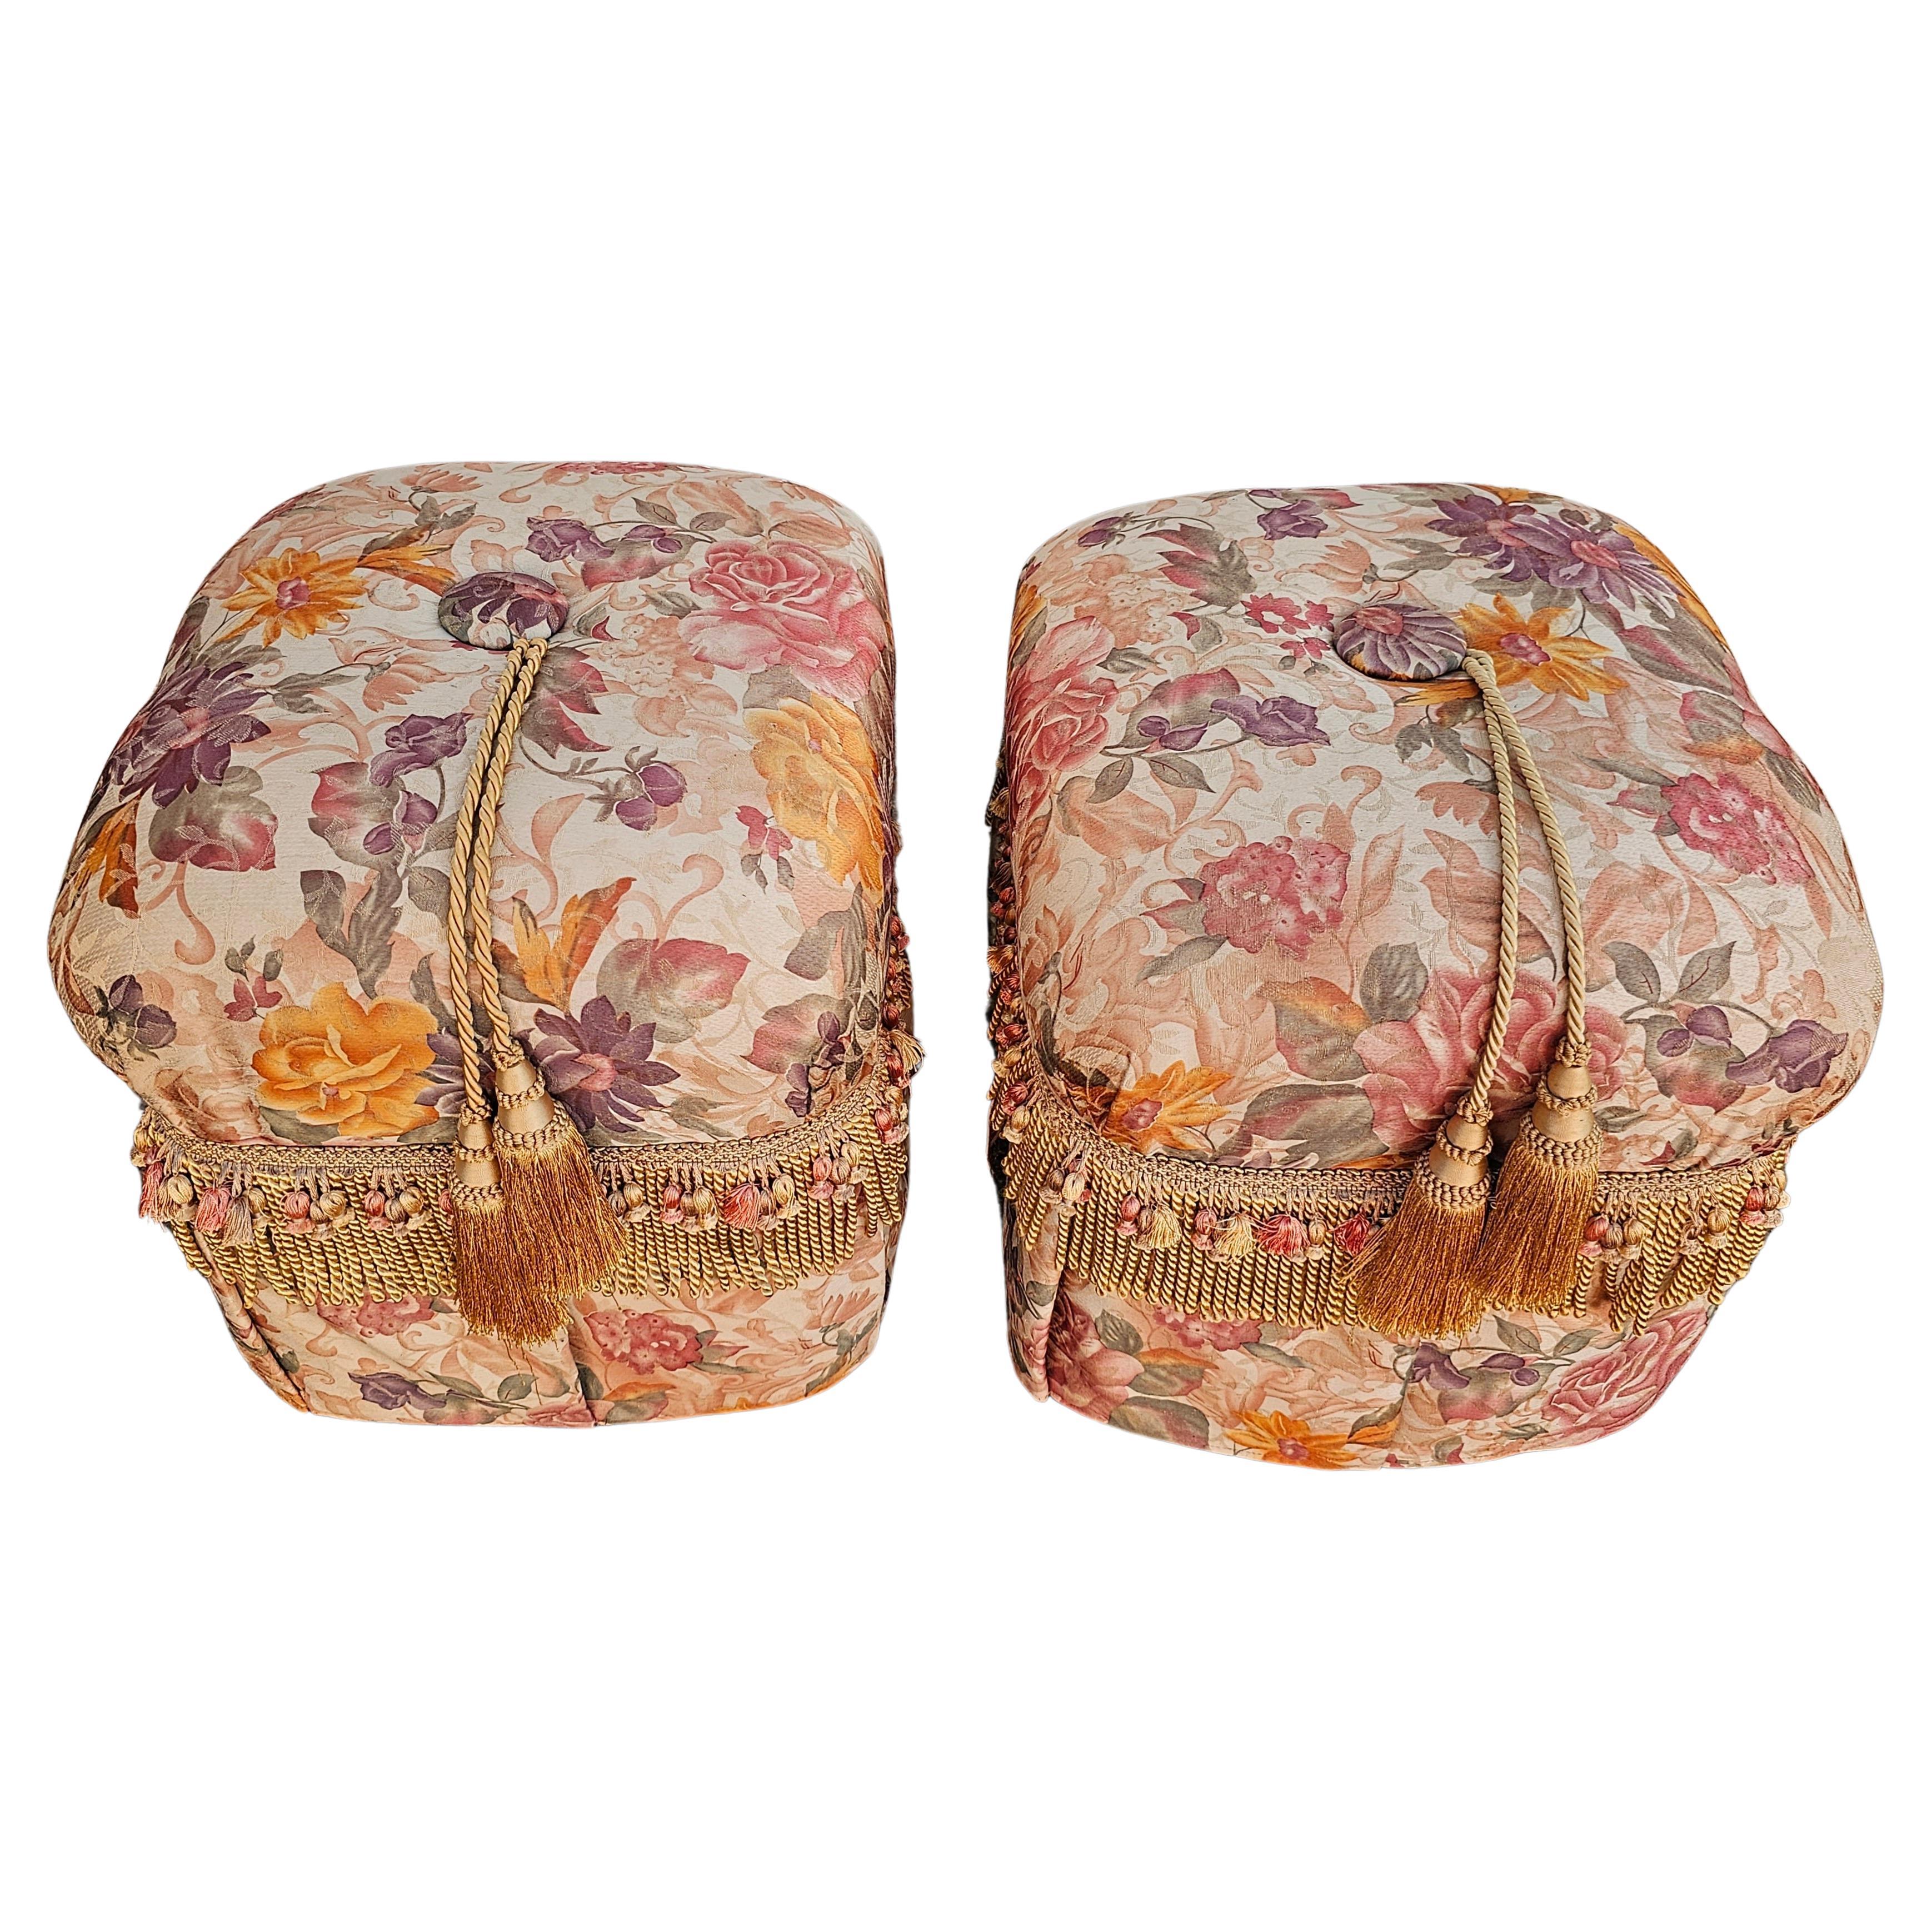 20th Century Modern Upholstered Decorative Footstool Ottomans, Pair. This pair is made out of polyester textile, Polychrome cover, polyurethane cover foam, cardboard and wooden base structure. Measures 18